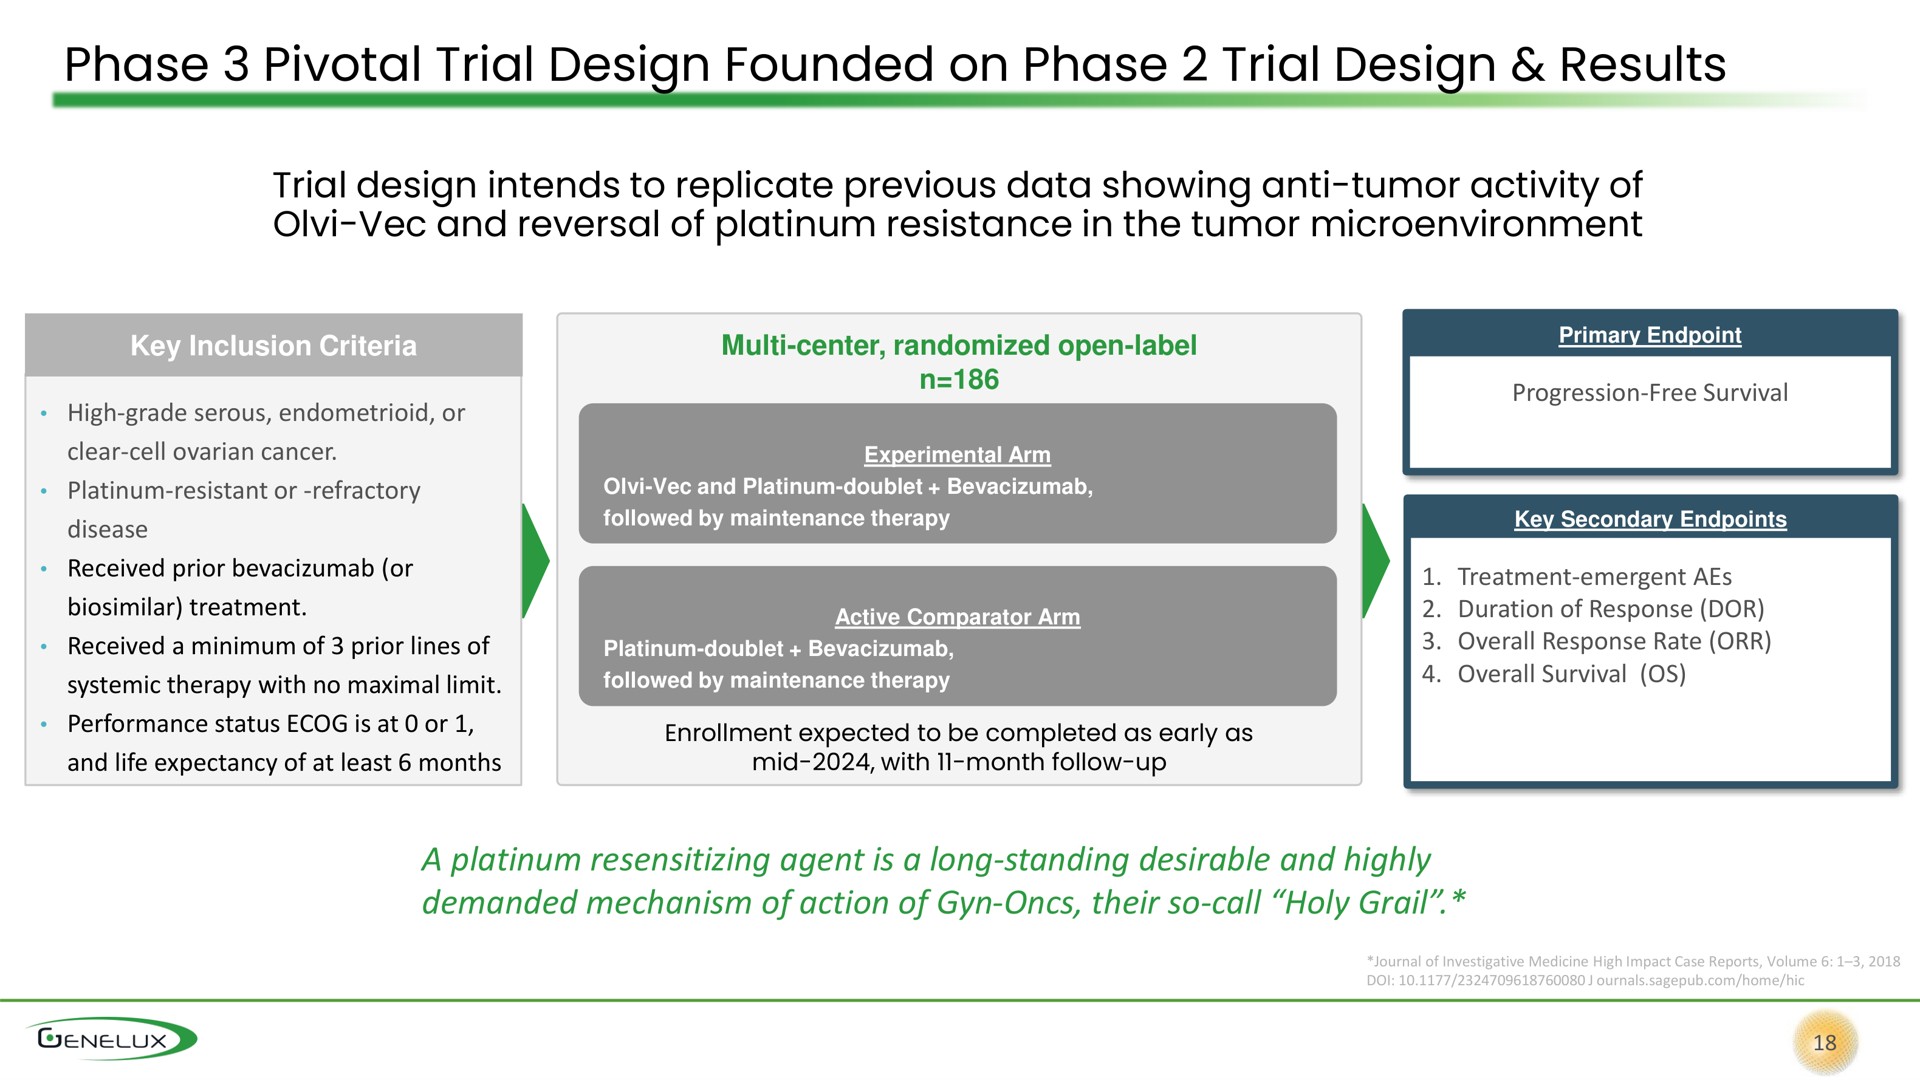 phase pivotal trial design founded on phase trial design results | Genelux